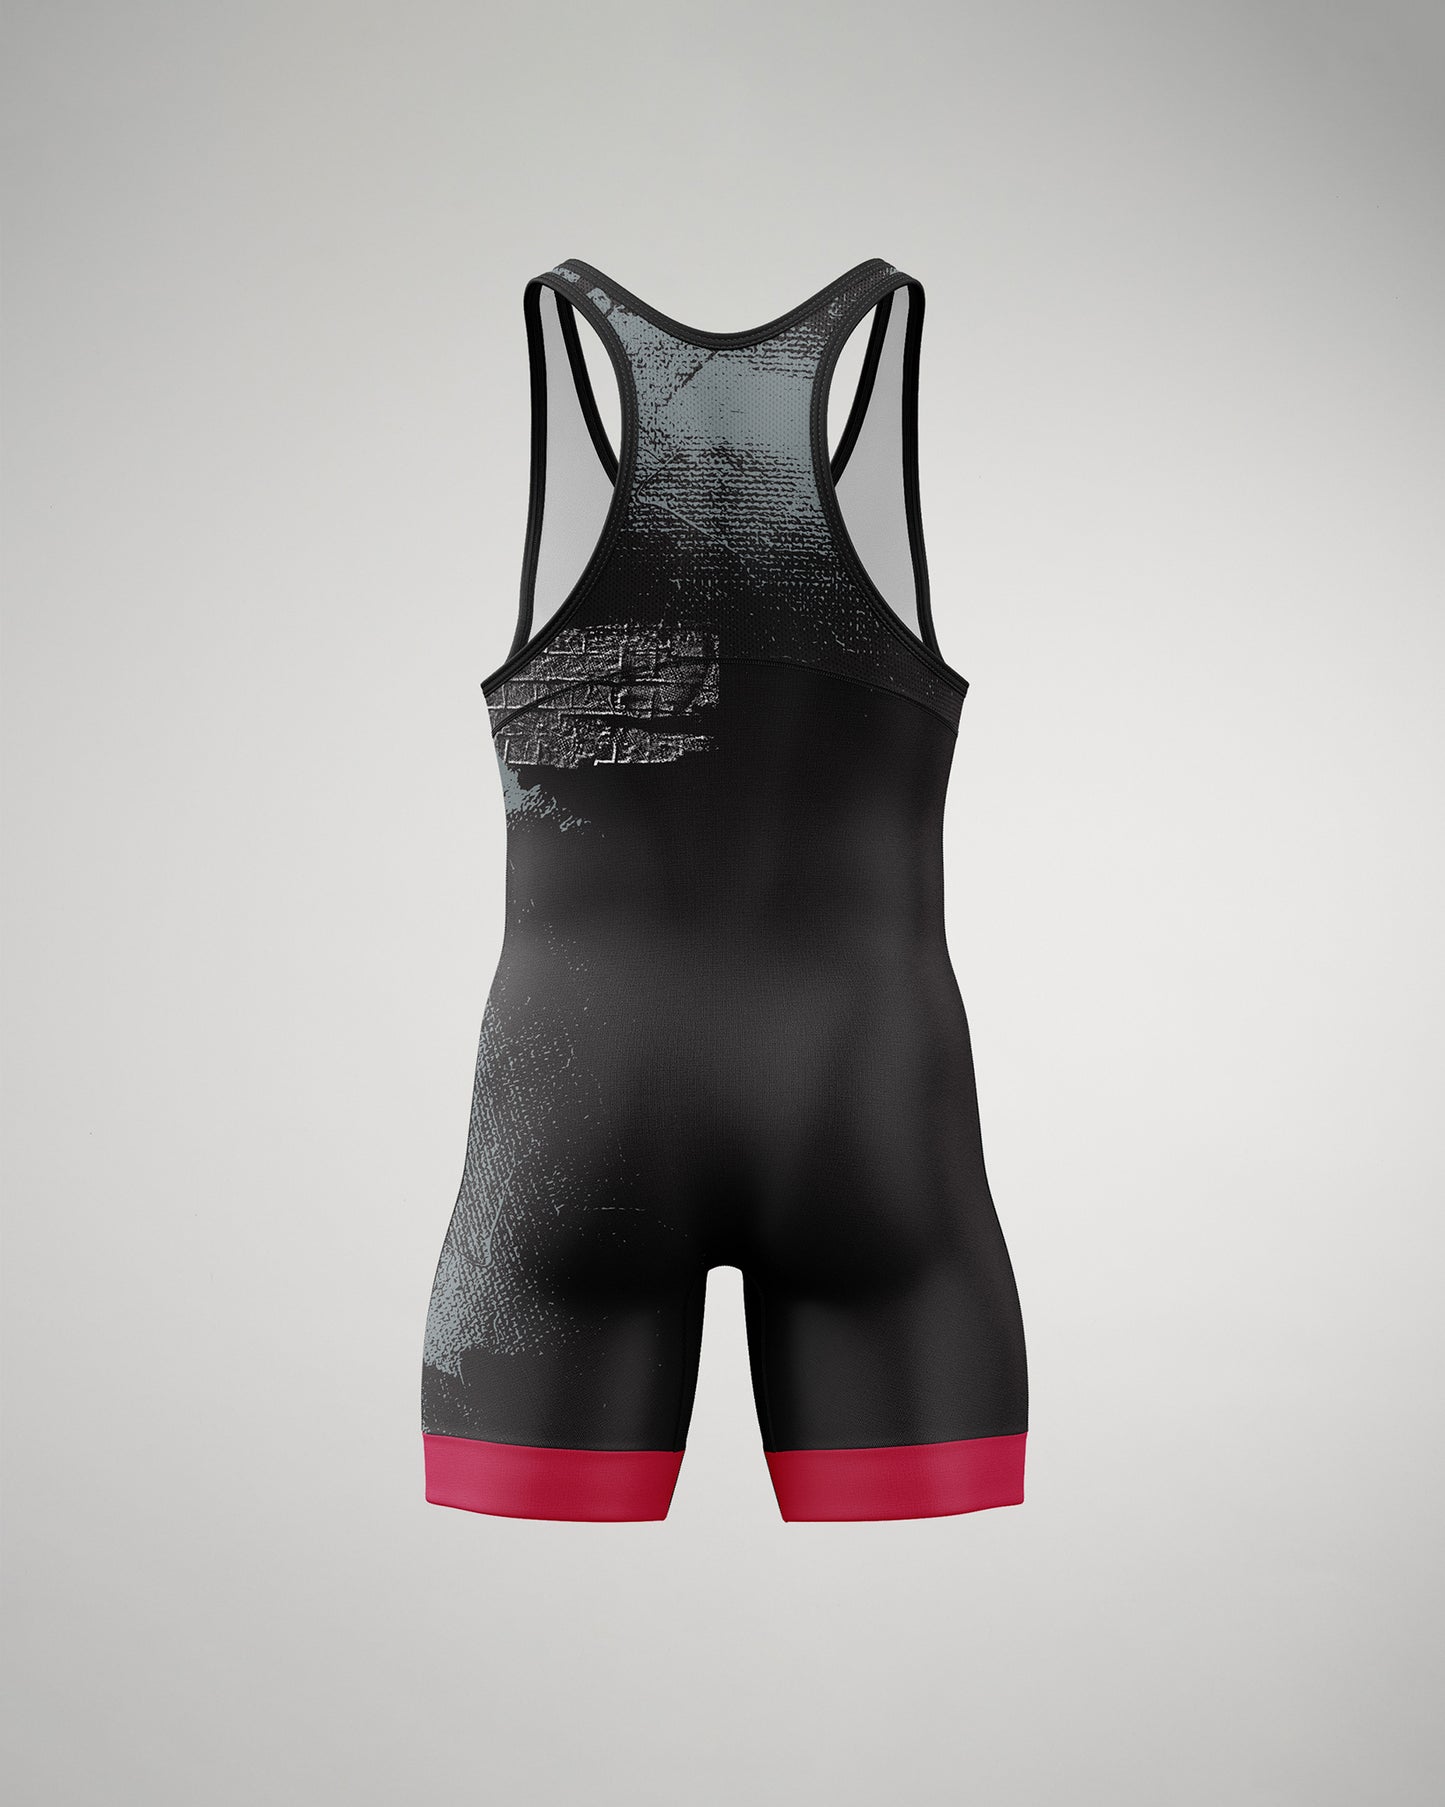 A Way of Life Controlled Chaos Elite 2.0 Singlet